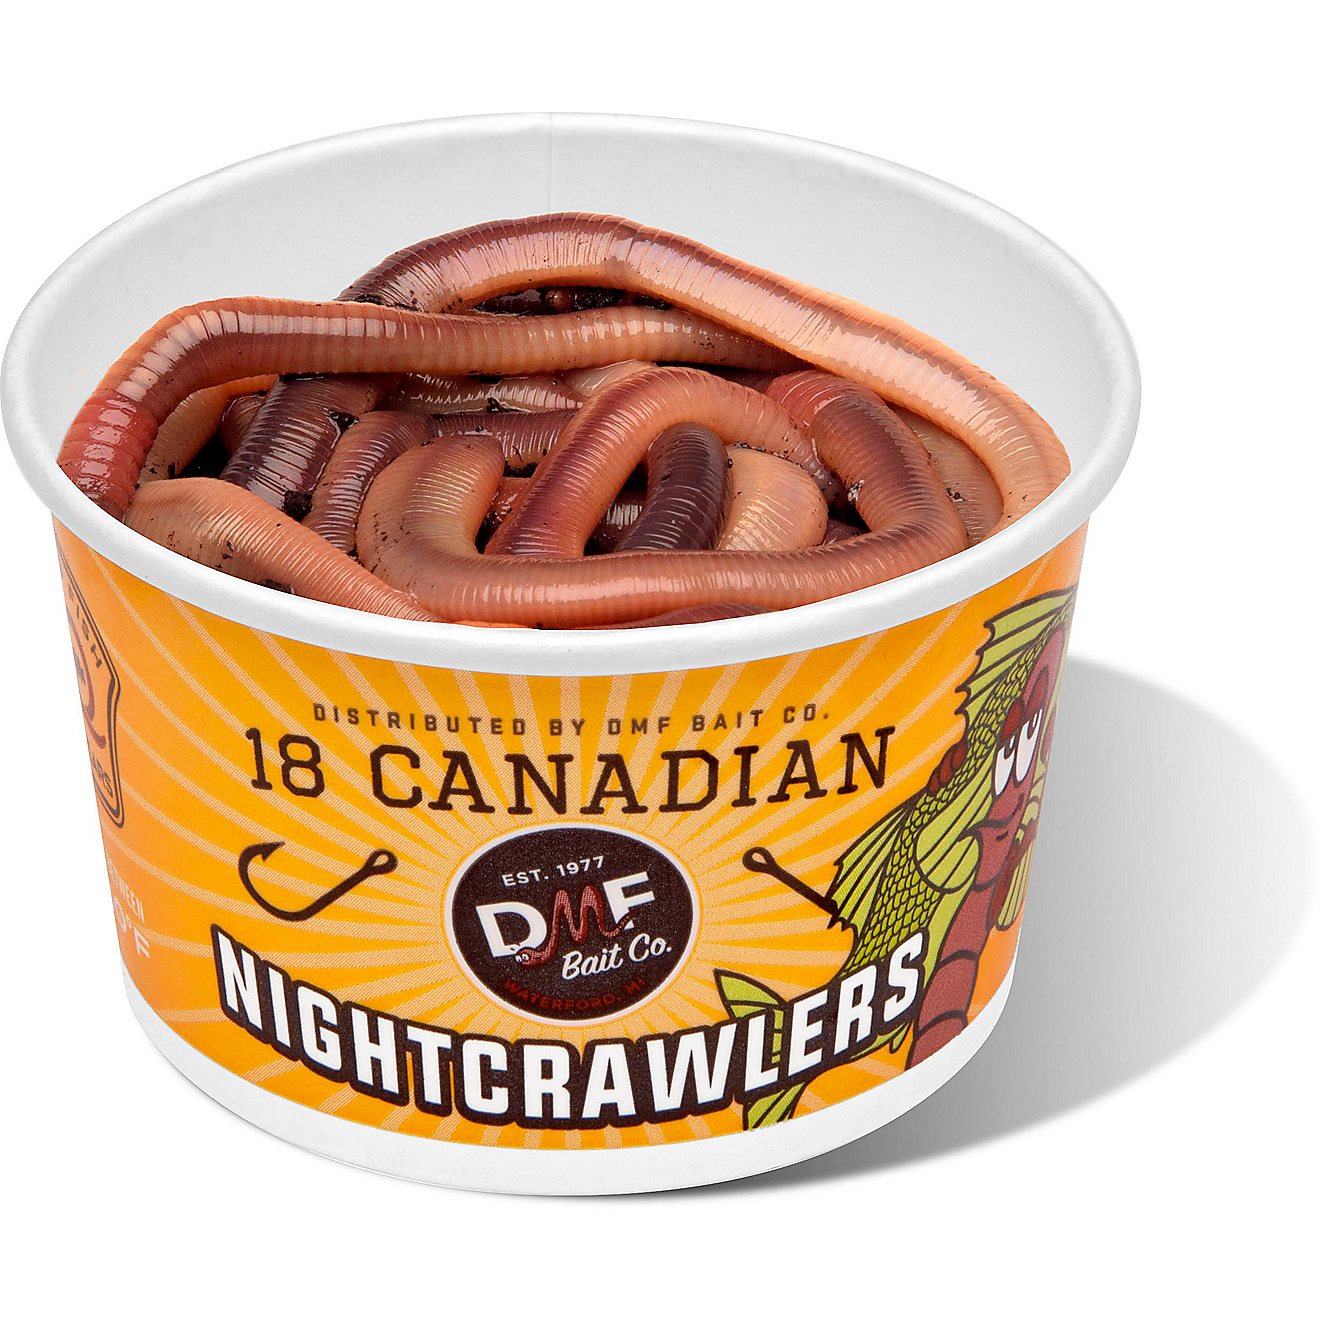 Canadian Nightcrawlers Worms (Live Bait) - NORTH RIVER OUTDOORS